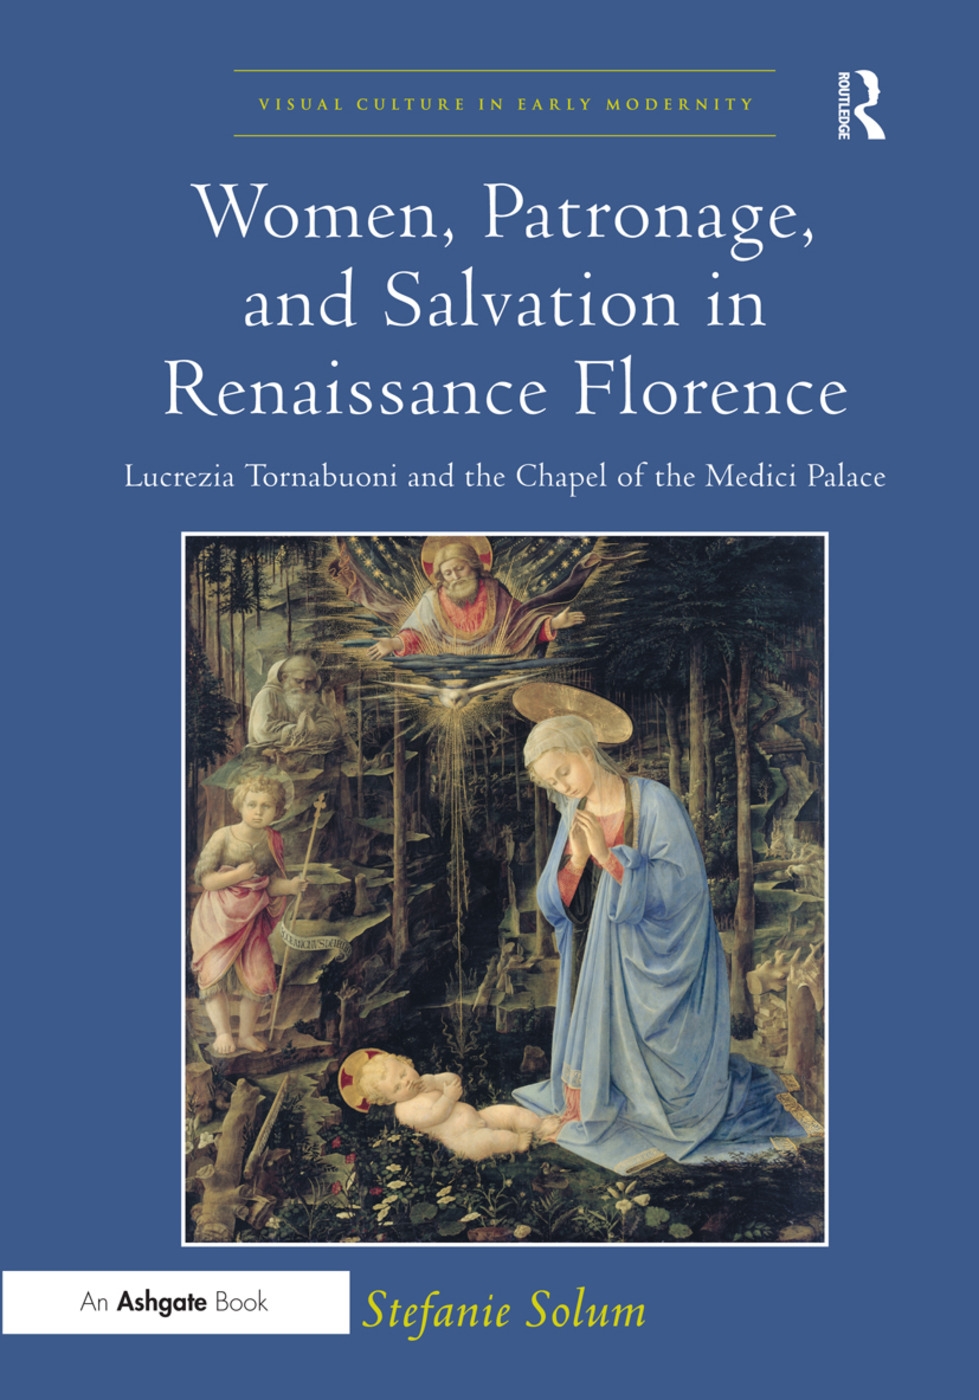 Women, Patronage, and Salvation in Renaissance Florence-Lucrezia Tornabuoni and the Chapel of the Medici Palace